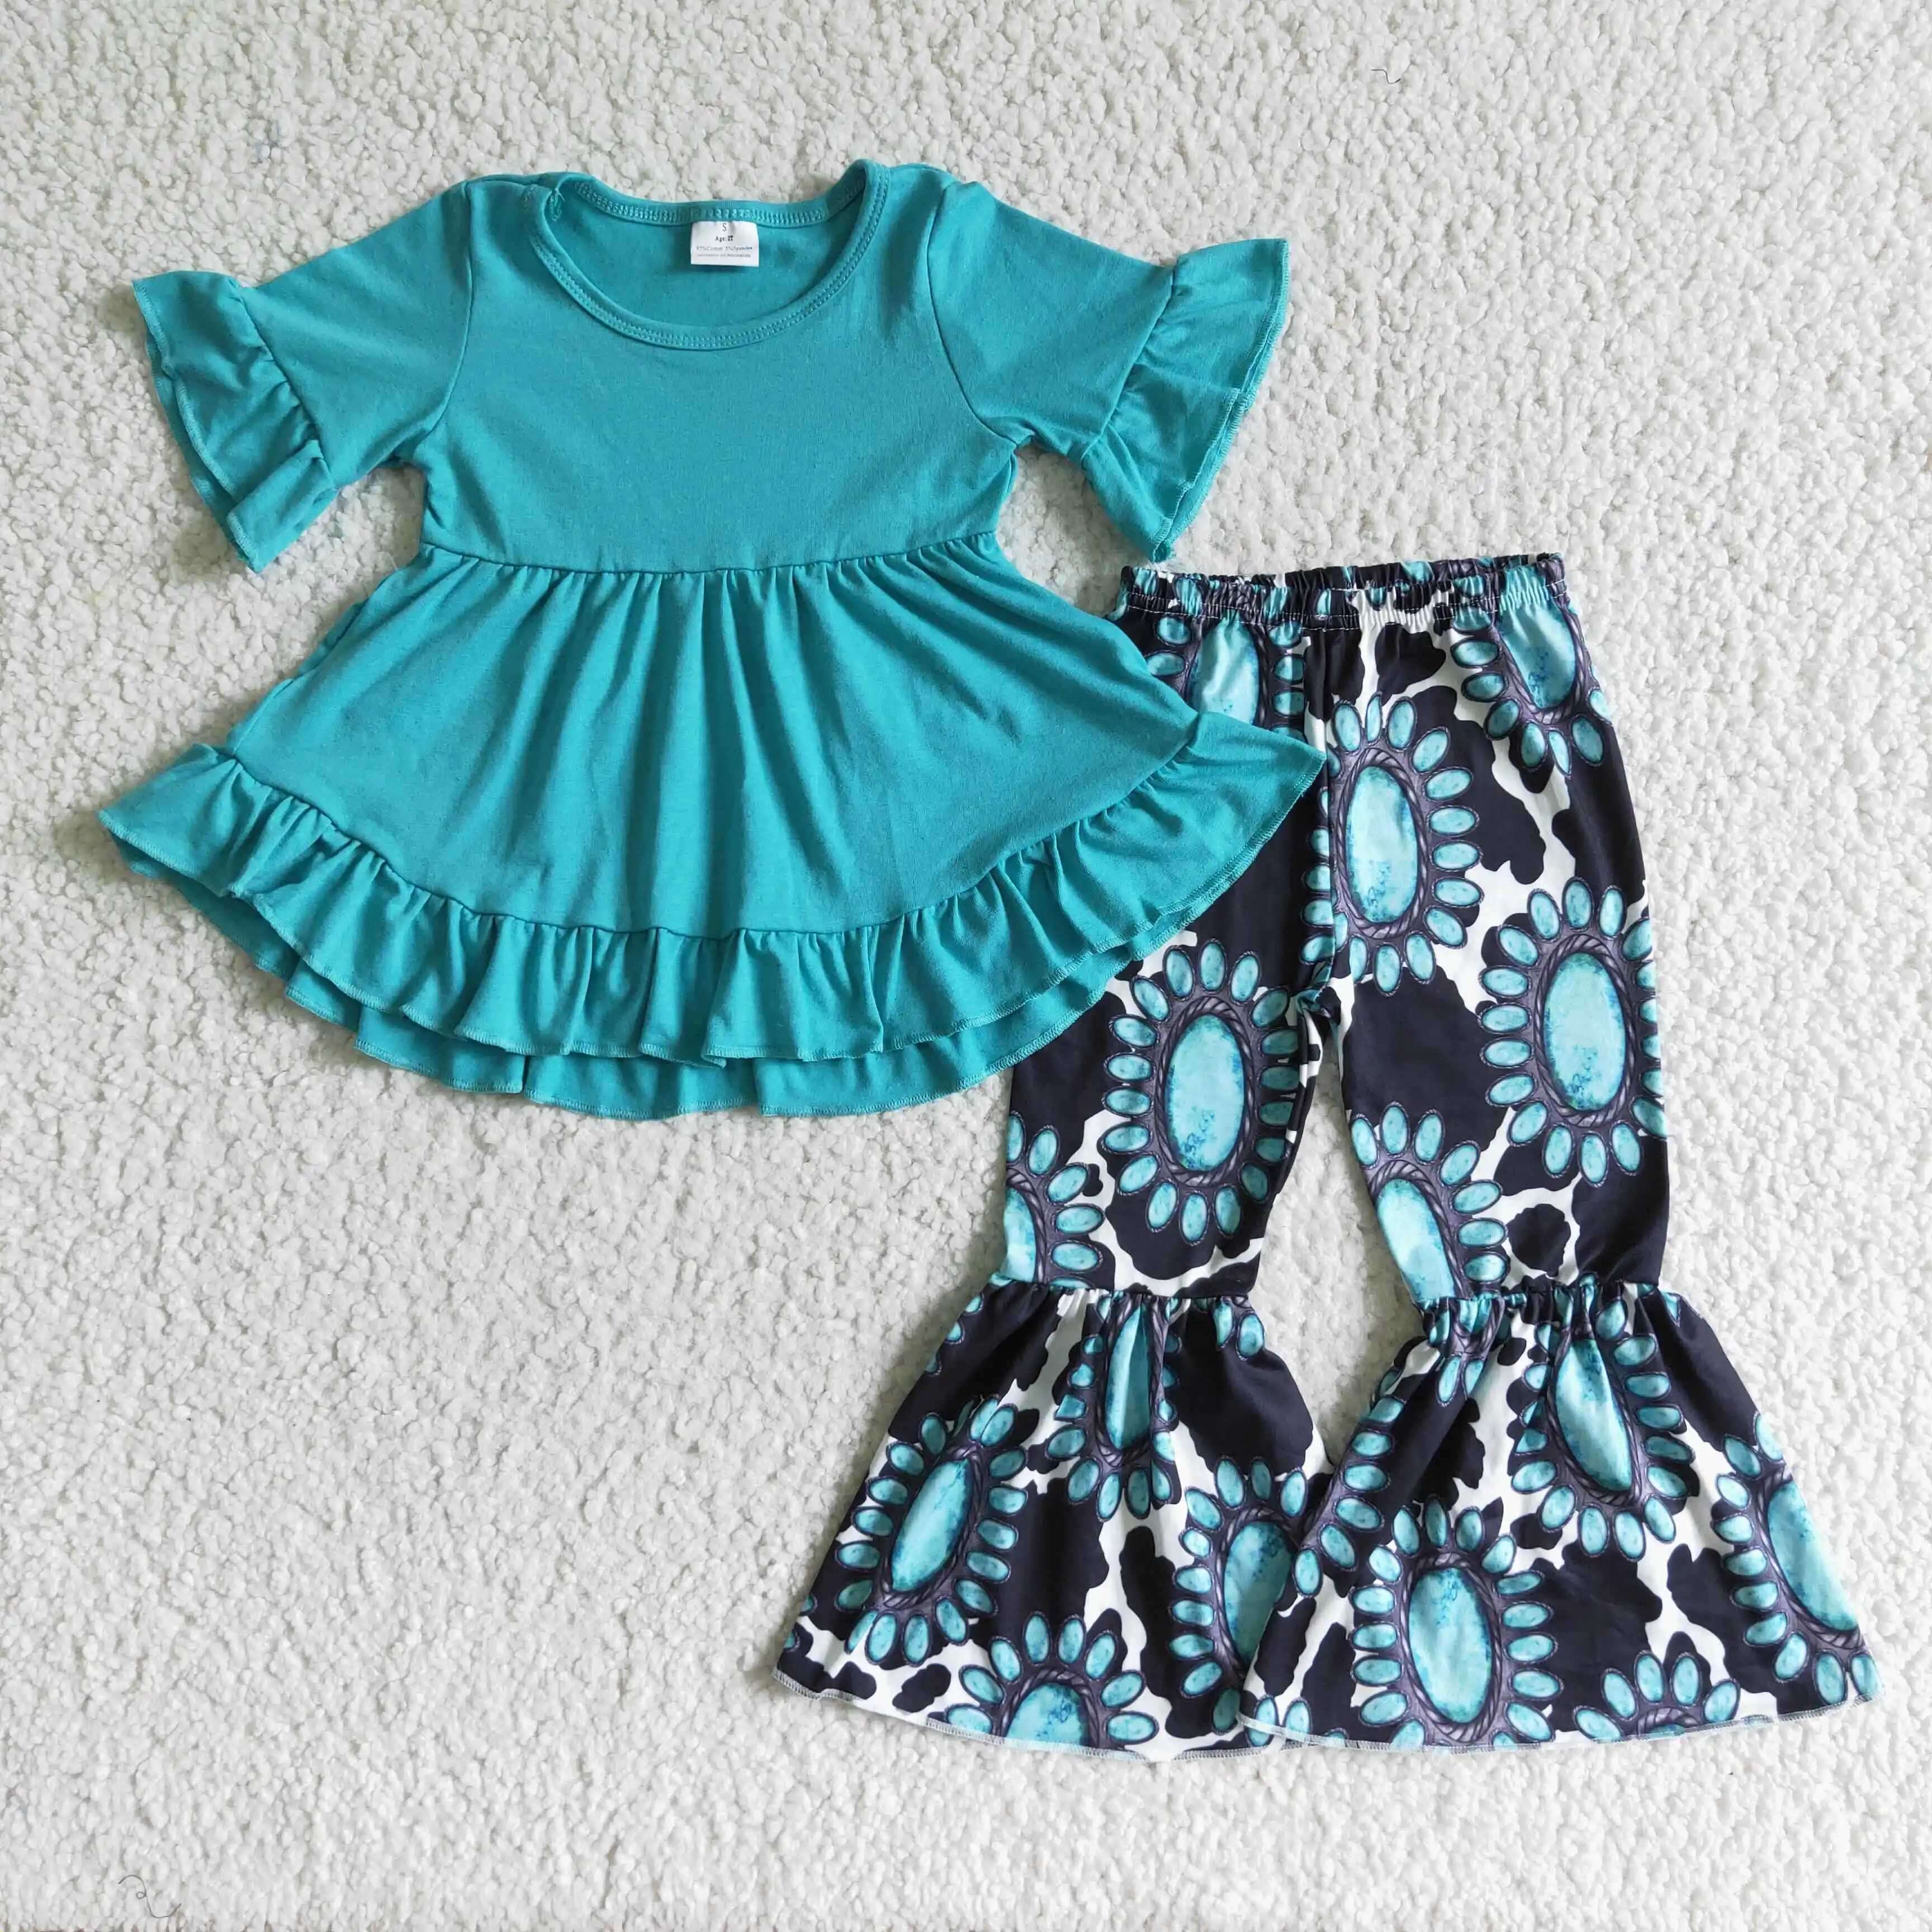 

2022 Baby Girls Kids Boutique Clothes Kids Short Sleeve Turquoise Top Bell-bottoms Flare Pants Set Outfits Girls Summer Outfit